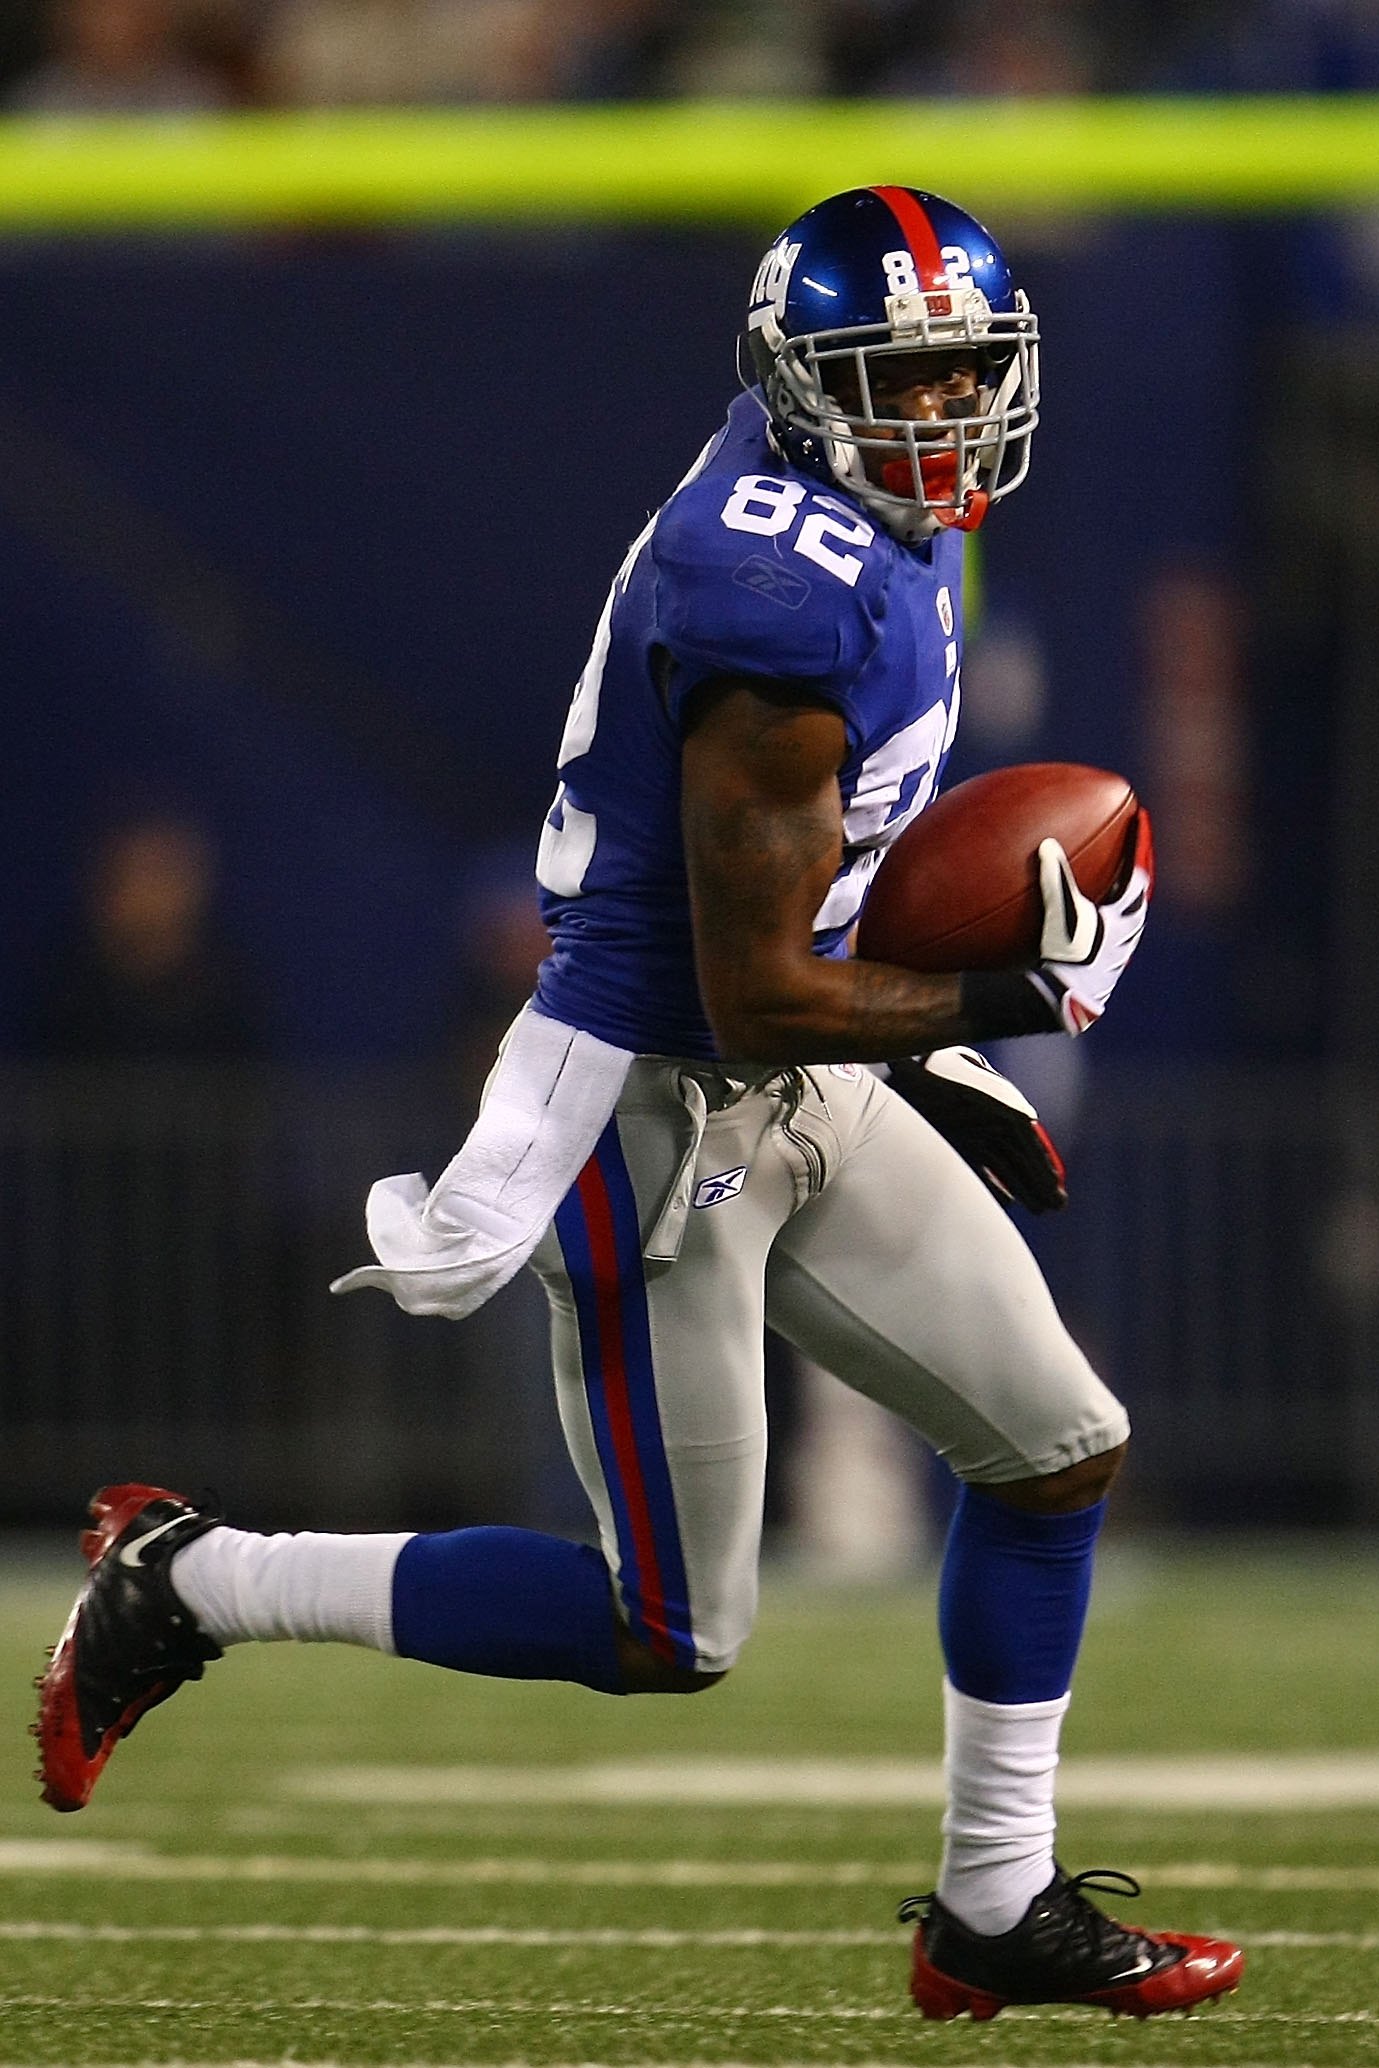 EAST RUTHERFORD, NJ - NOVEMBER 08:  Mario Manningham #82 of the New York Giants makes a break against the San Diego Chargers on November 8, 2009 at Giants Stadium in East Rutherford, New Jersey.  (Photo by Chris McGrath/Getty Images)